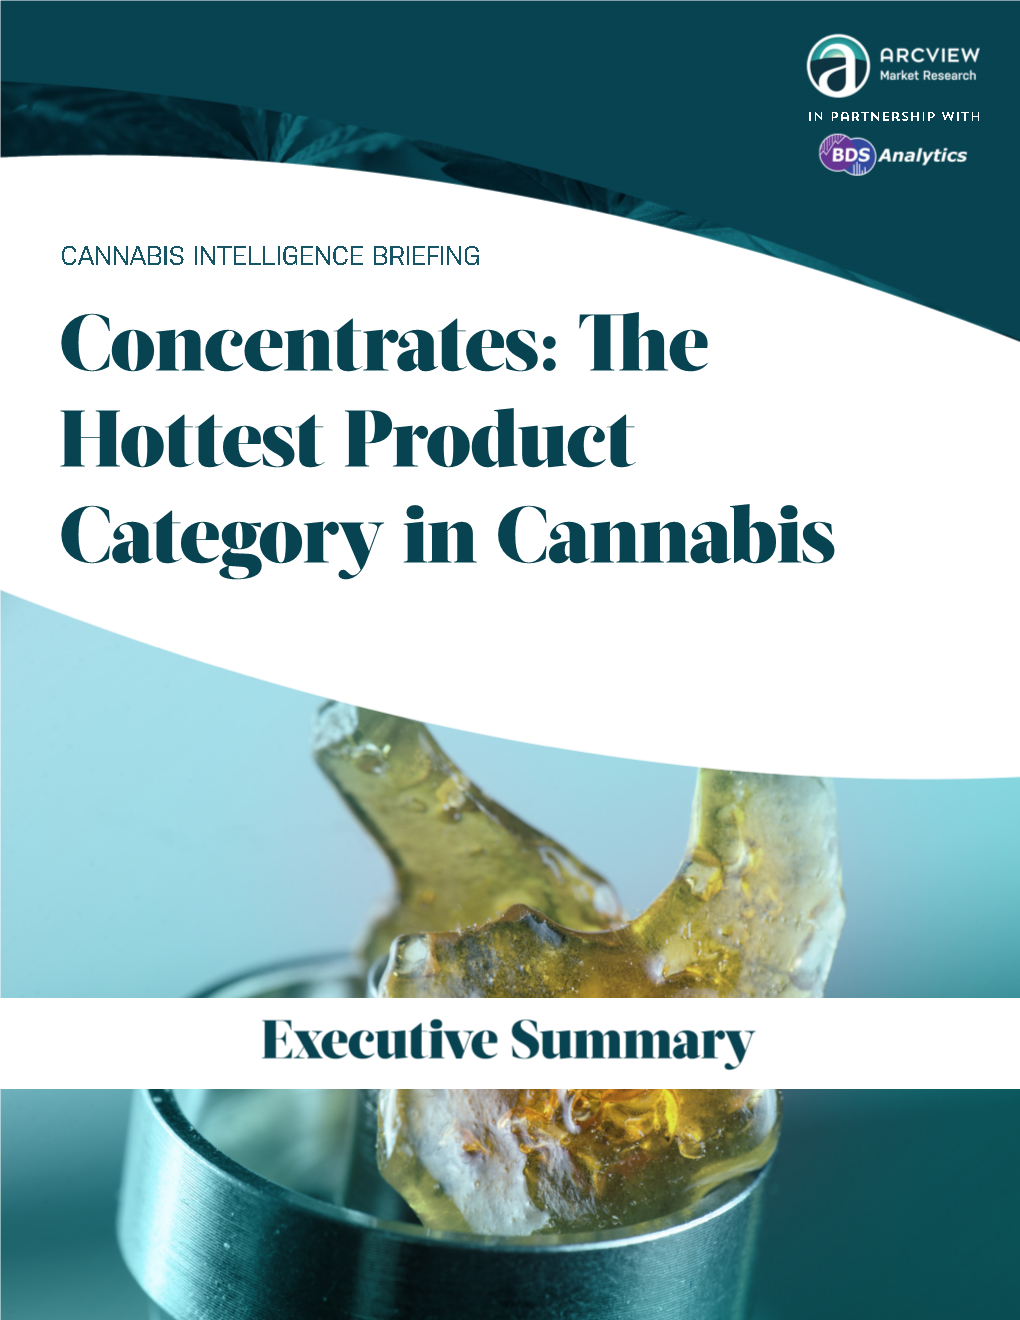 Concentrates: E Hottest Product Category in Cannabis Concentrates: the Hottest Product Category in Cannabis